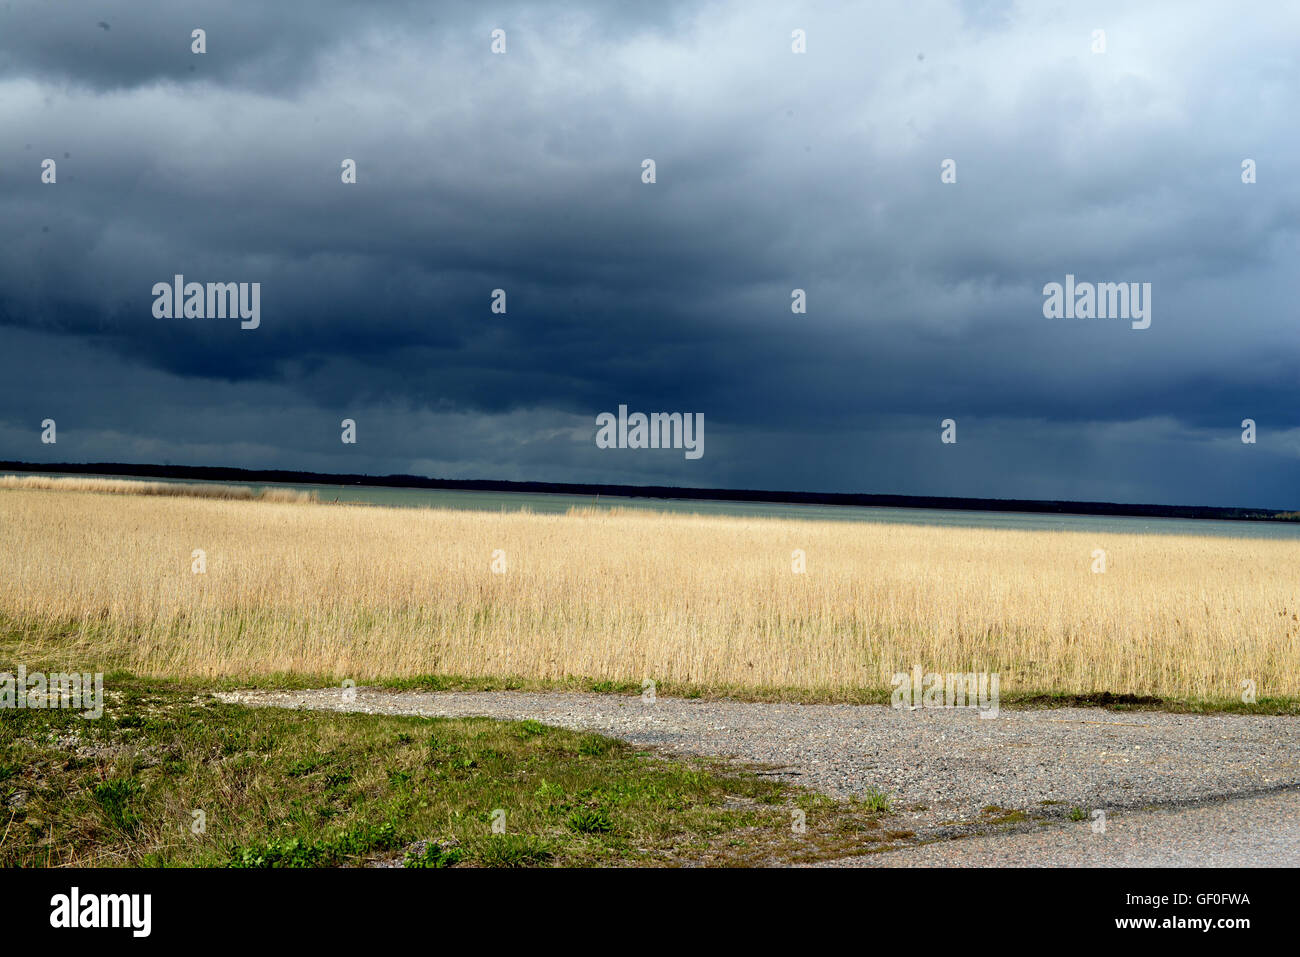 Dark clouds, contrasting with water Stock Photo